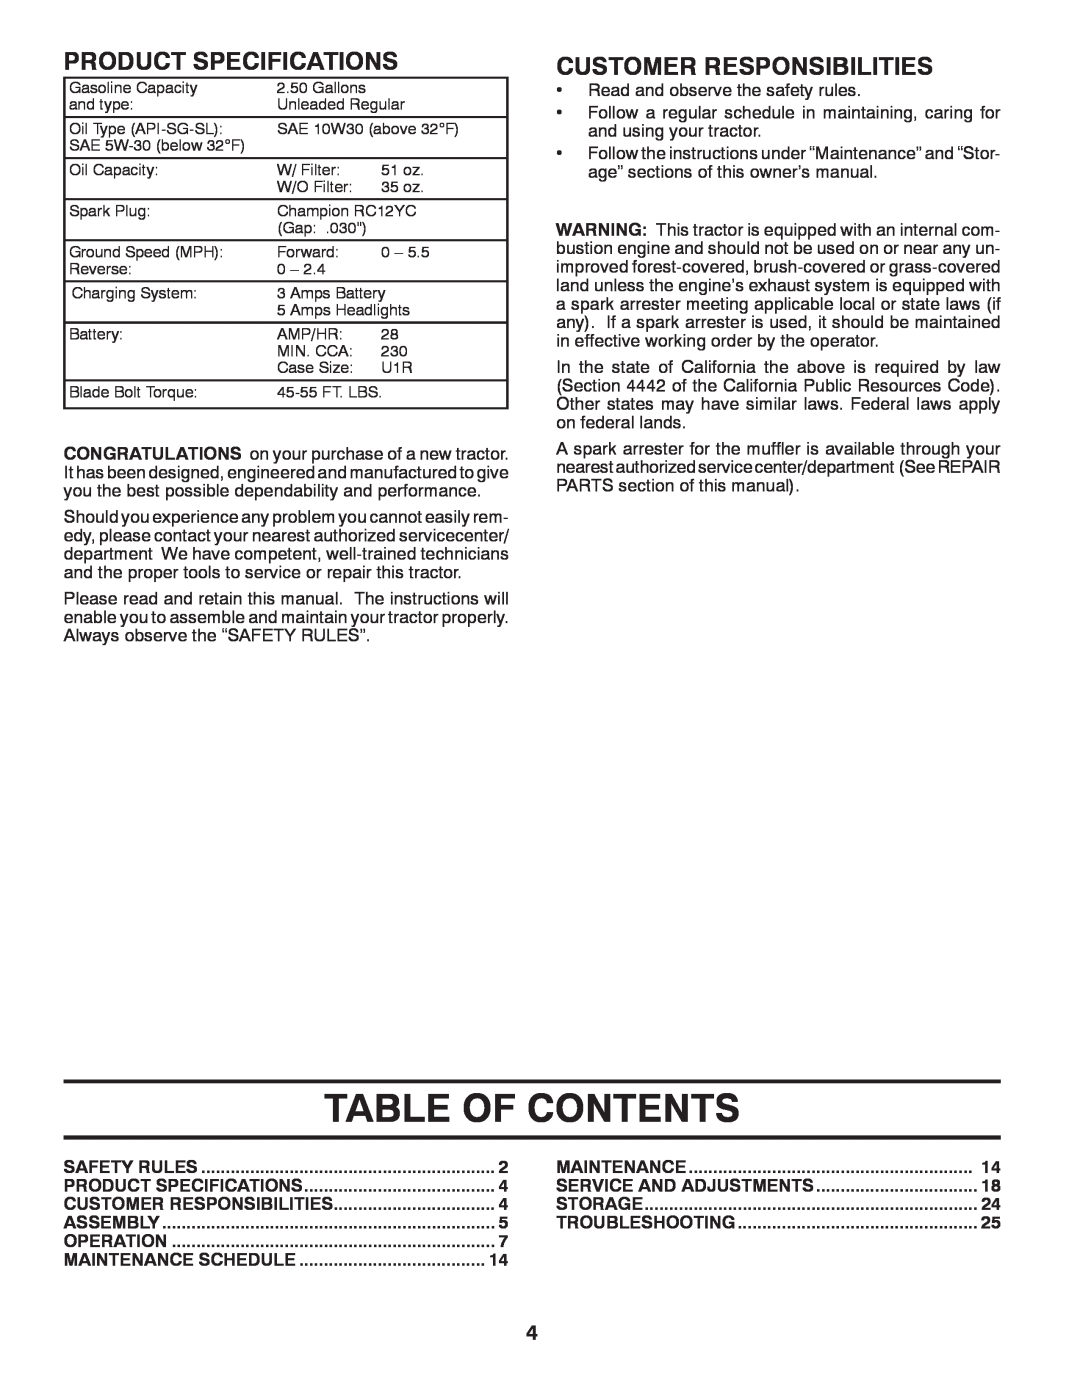 Poulan PPH20K46 manual Table Of Contents, Product Specifications, Customer Responsibilities 